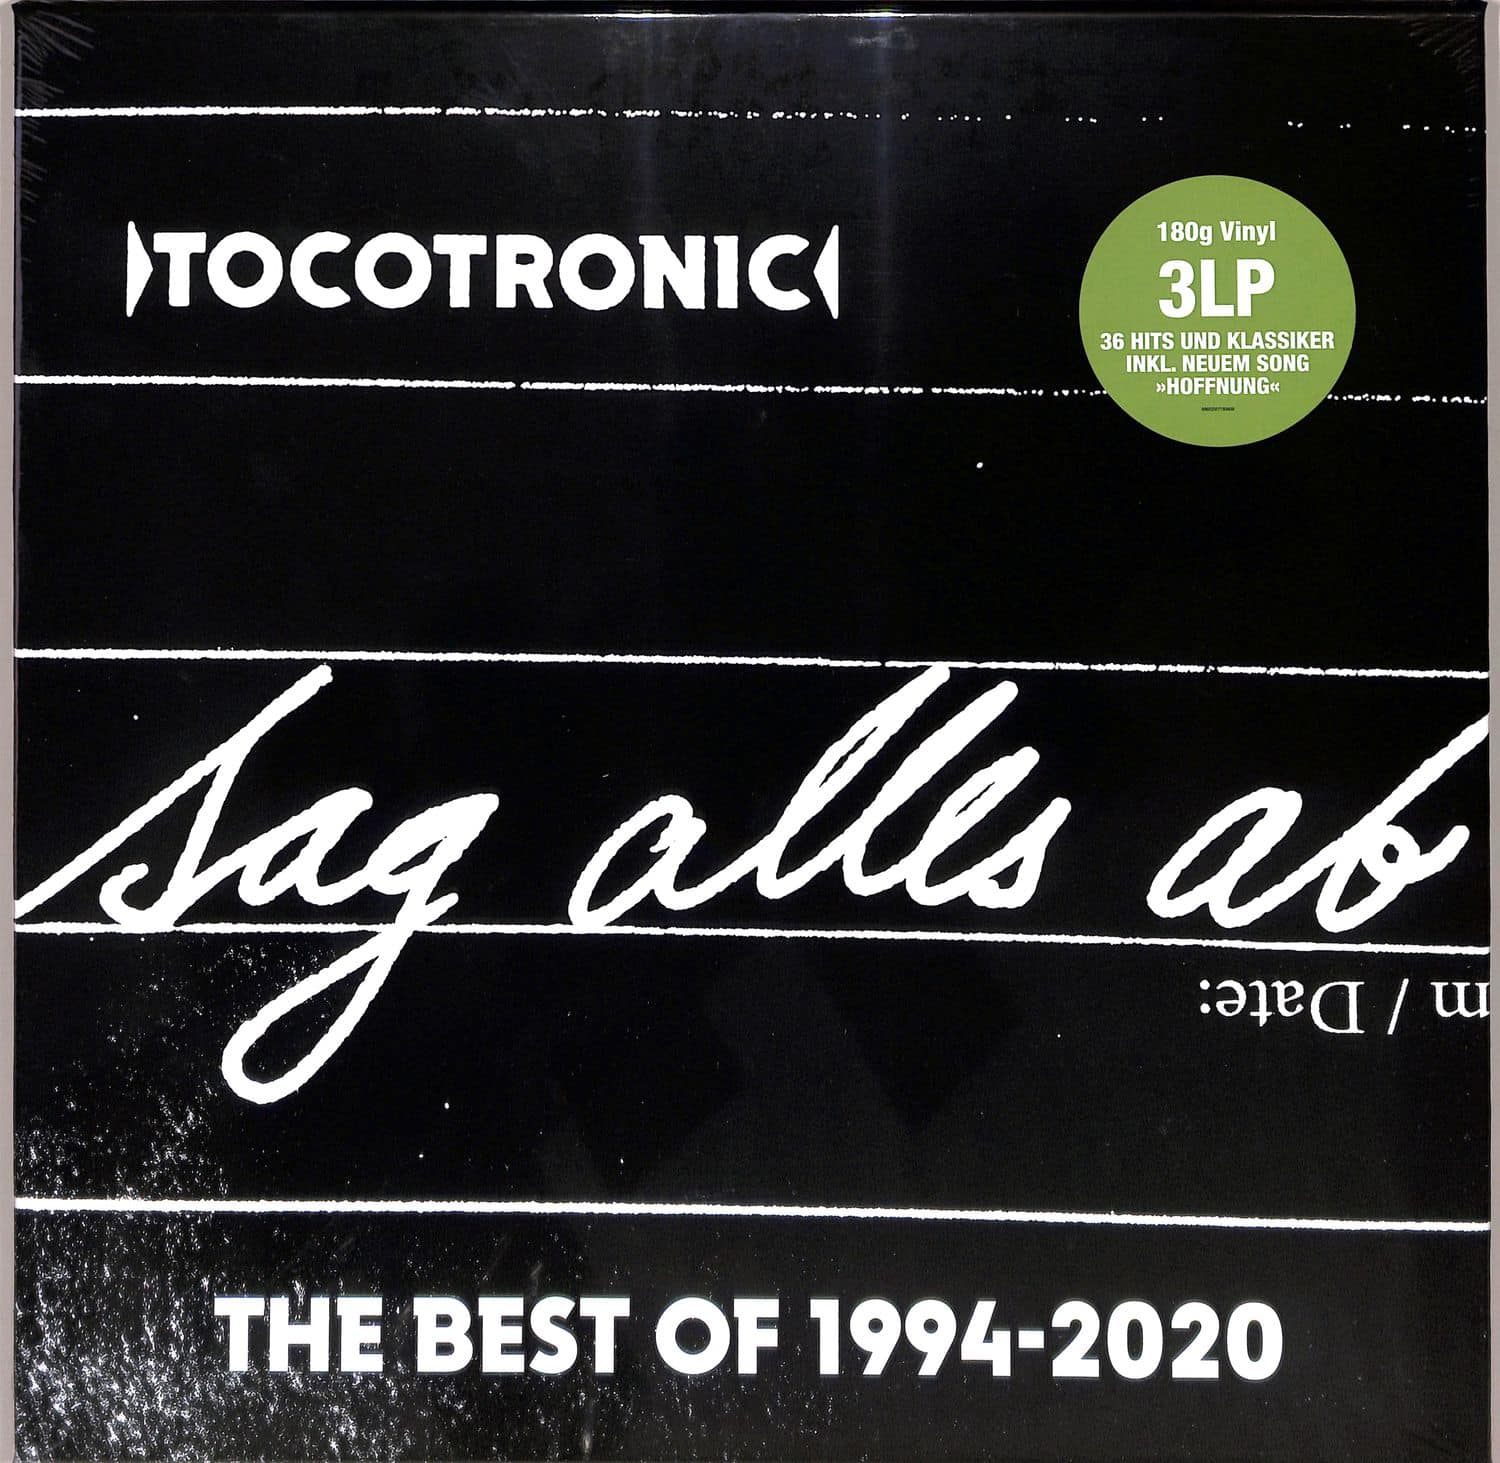 Tocotronic - SAG ALLES AB - BEST OF 1994-2020 